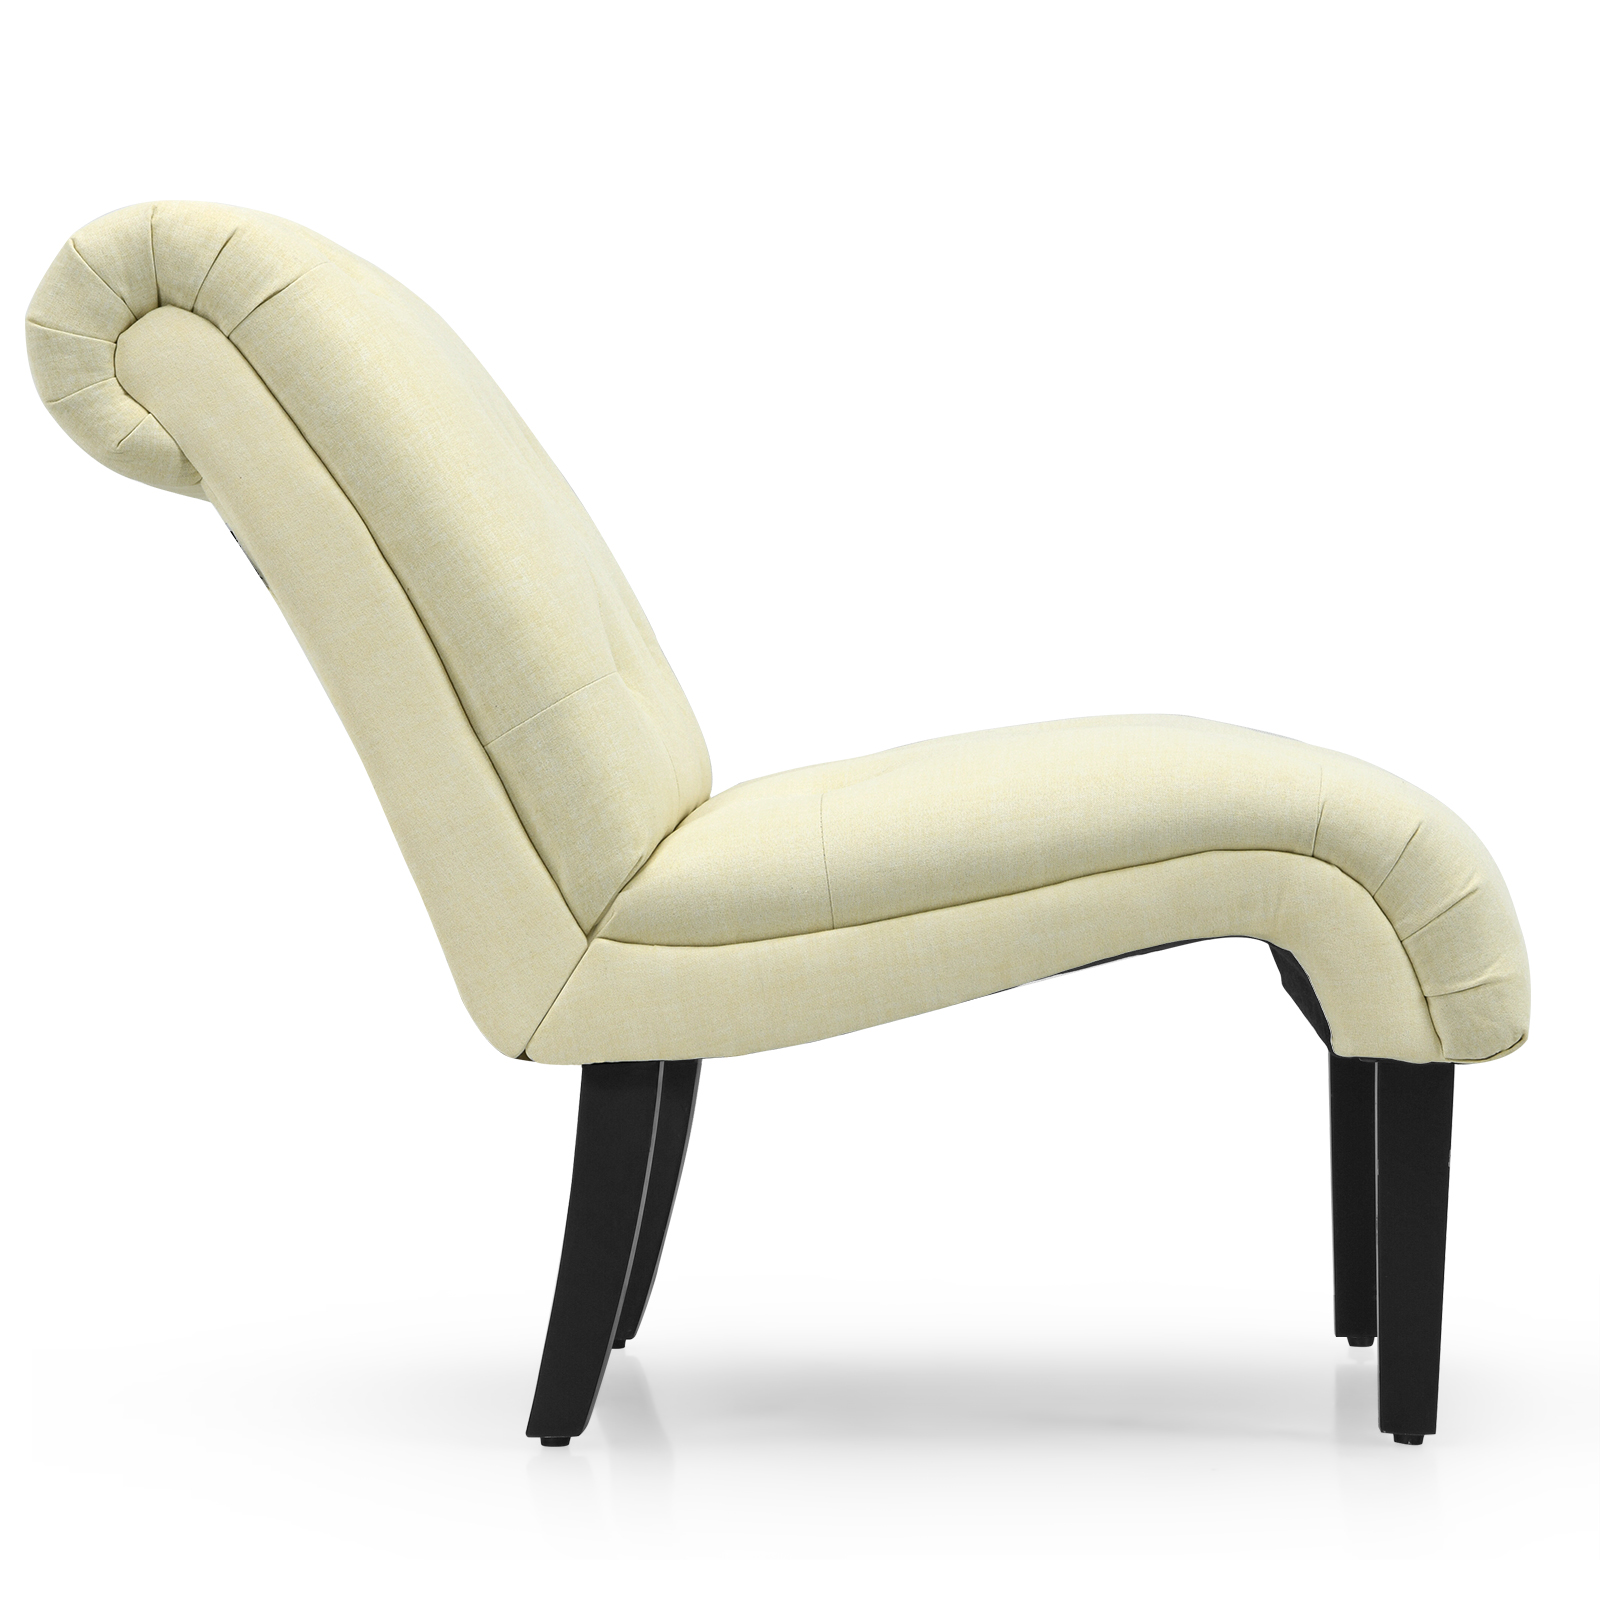 Modern_Upholstered_Accent_Chair_with_Button_Tufted_Linen_Fabric_Beige-9.jpg